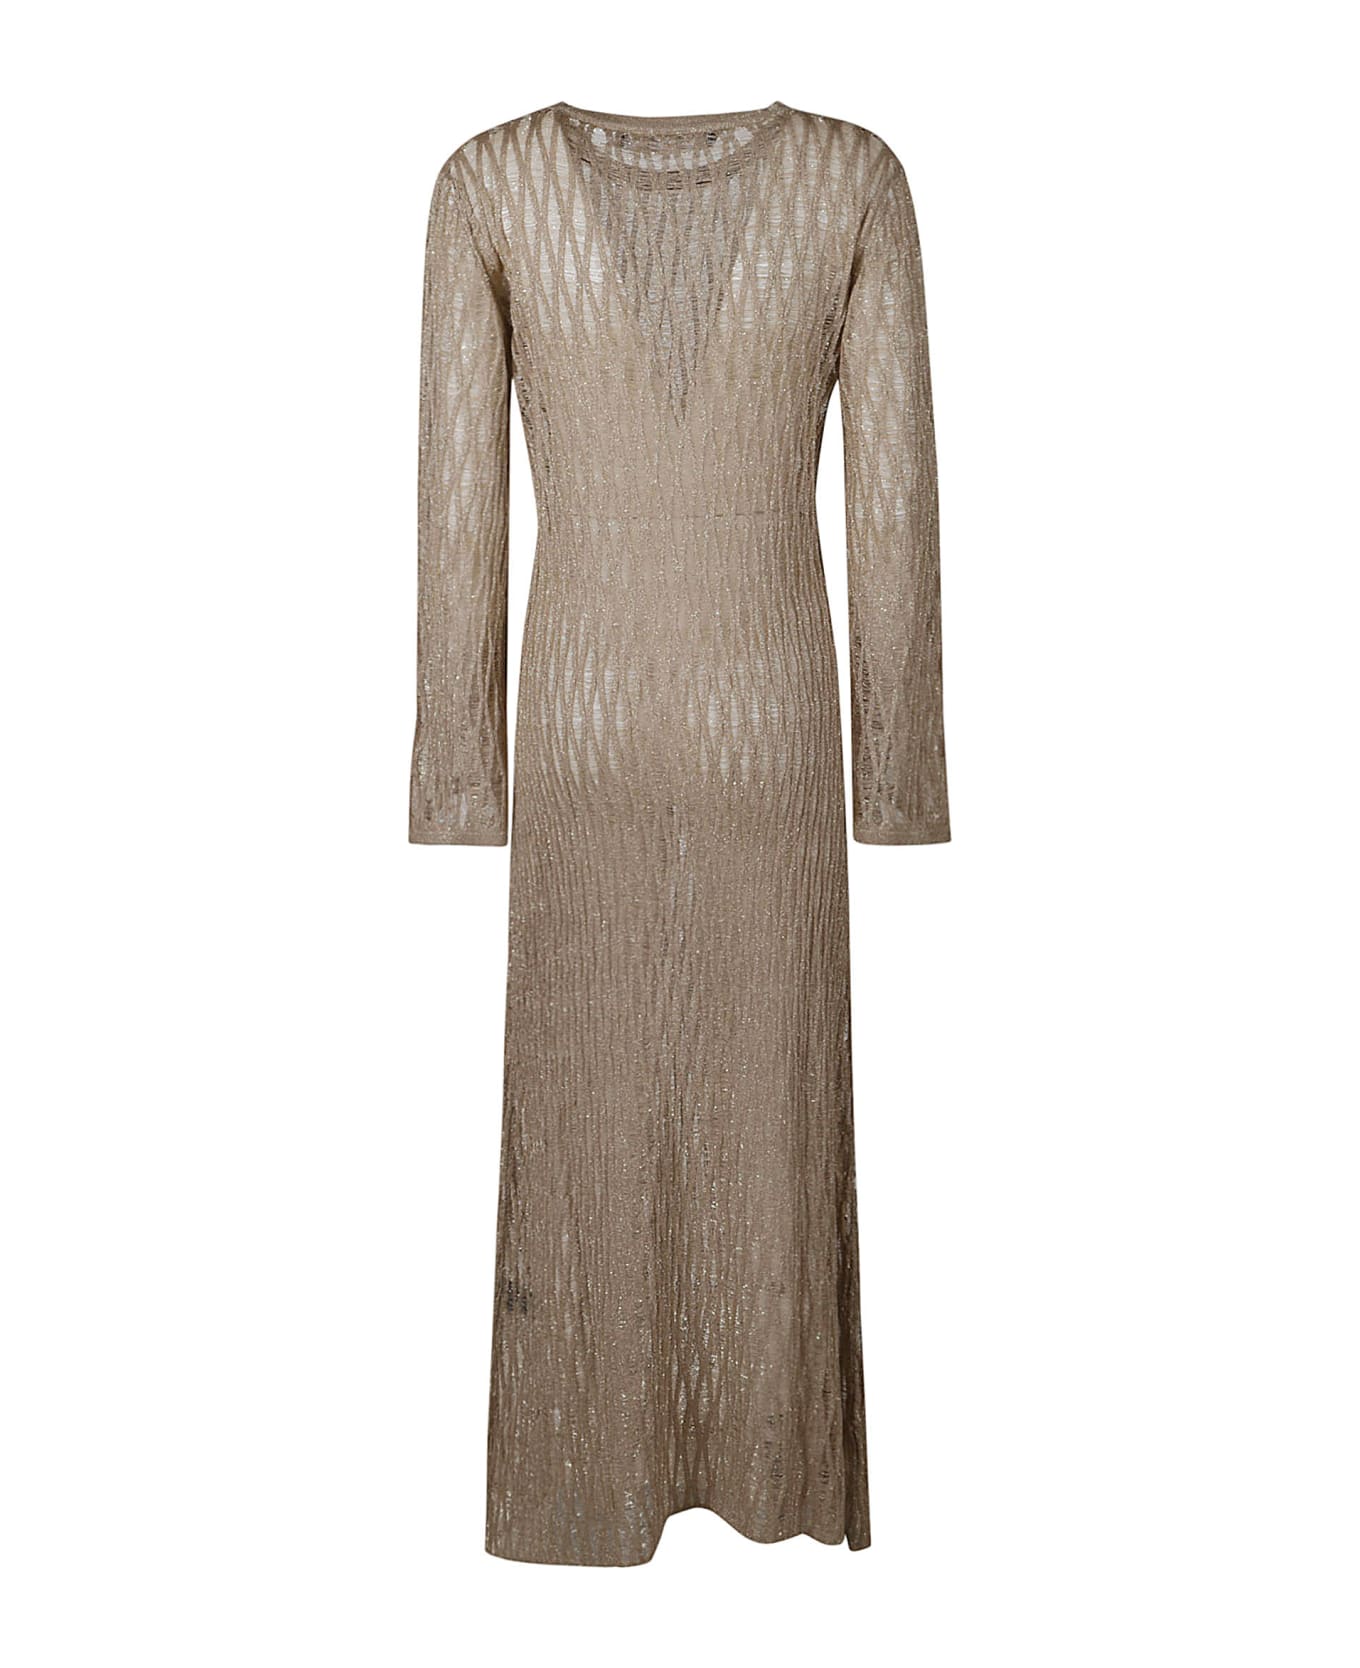 Federica Tosi See Through Long-sleeved Dress - Gold ワンピース＆ドレス